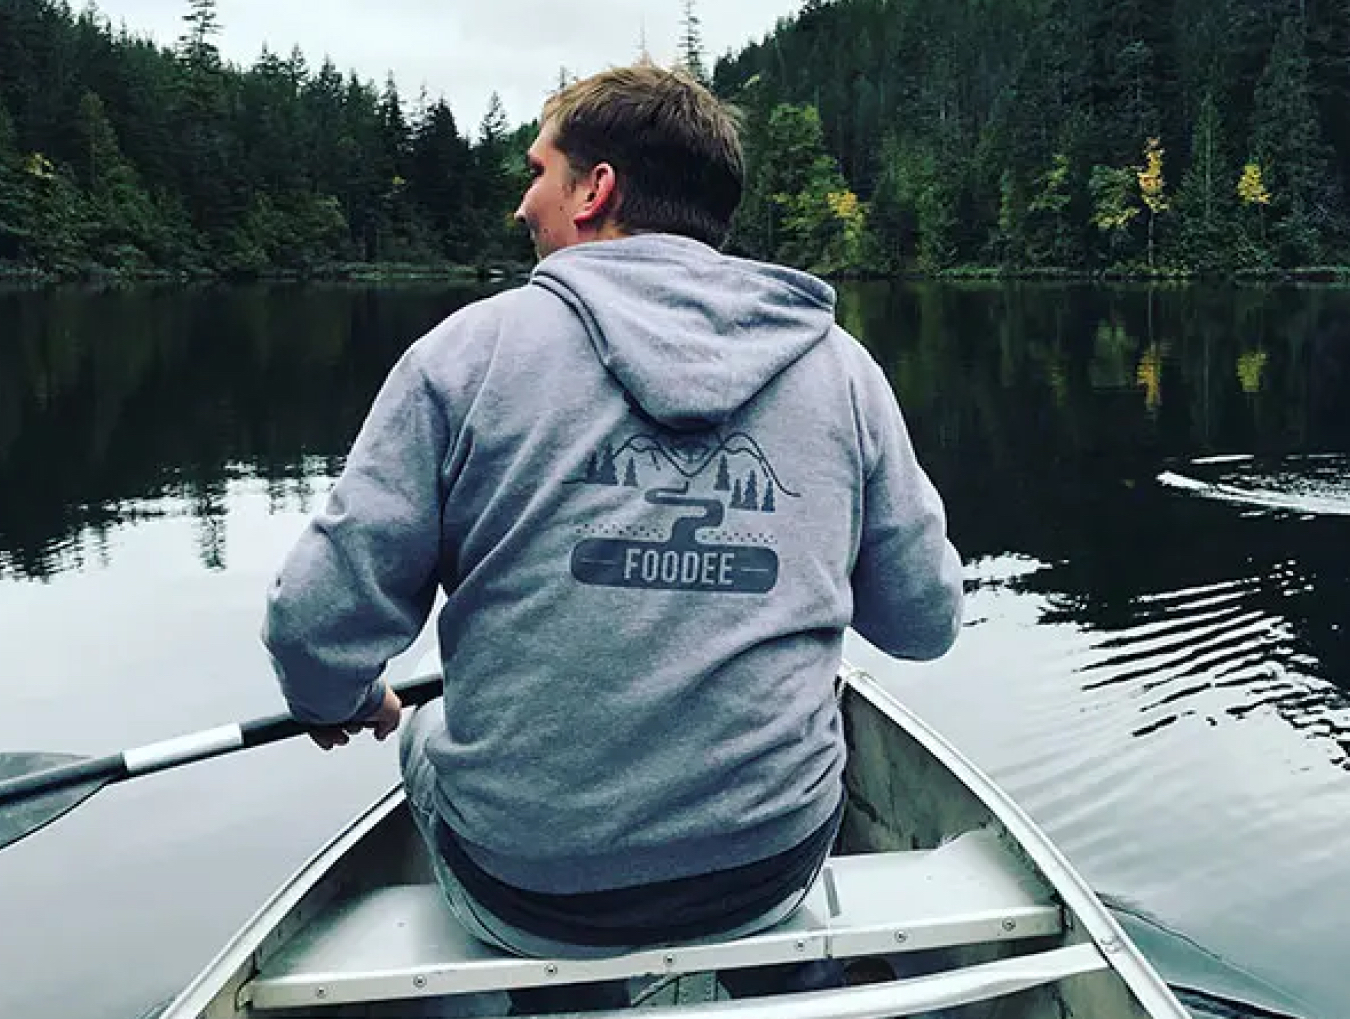 A Foodee employee wearing a grey hoodie with the Foodee logo on the back, sitting in a canoe on a Lake with green trees in the background.